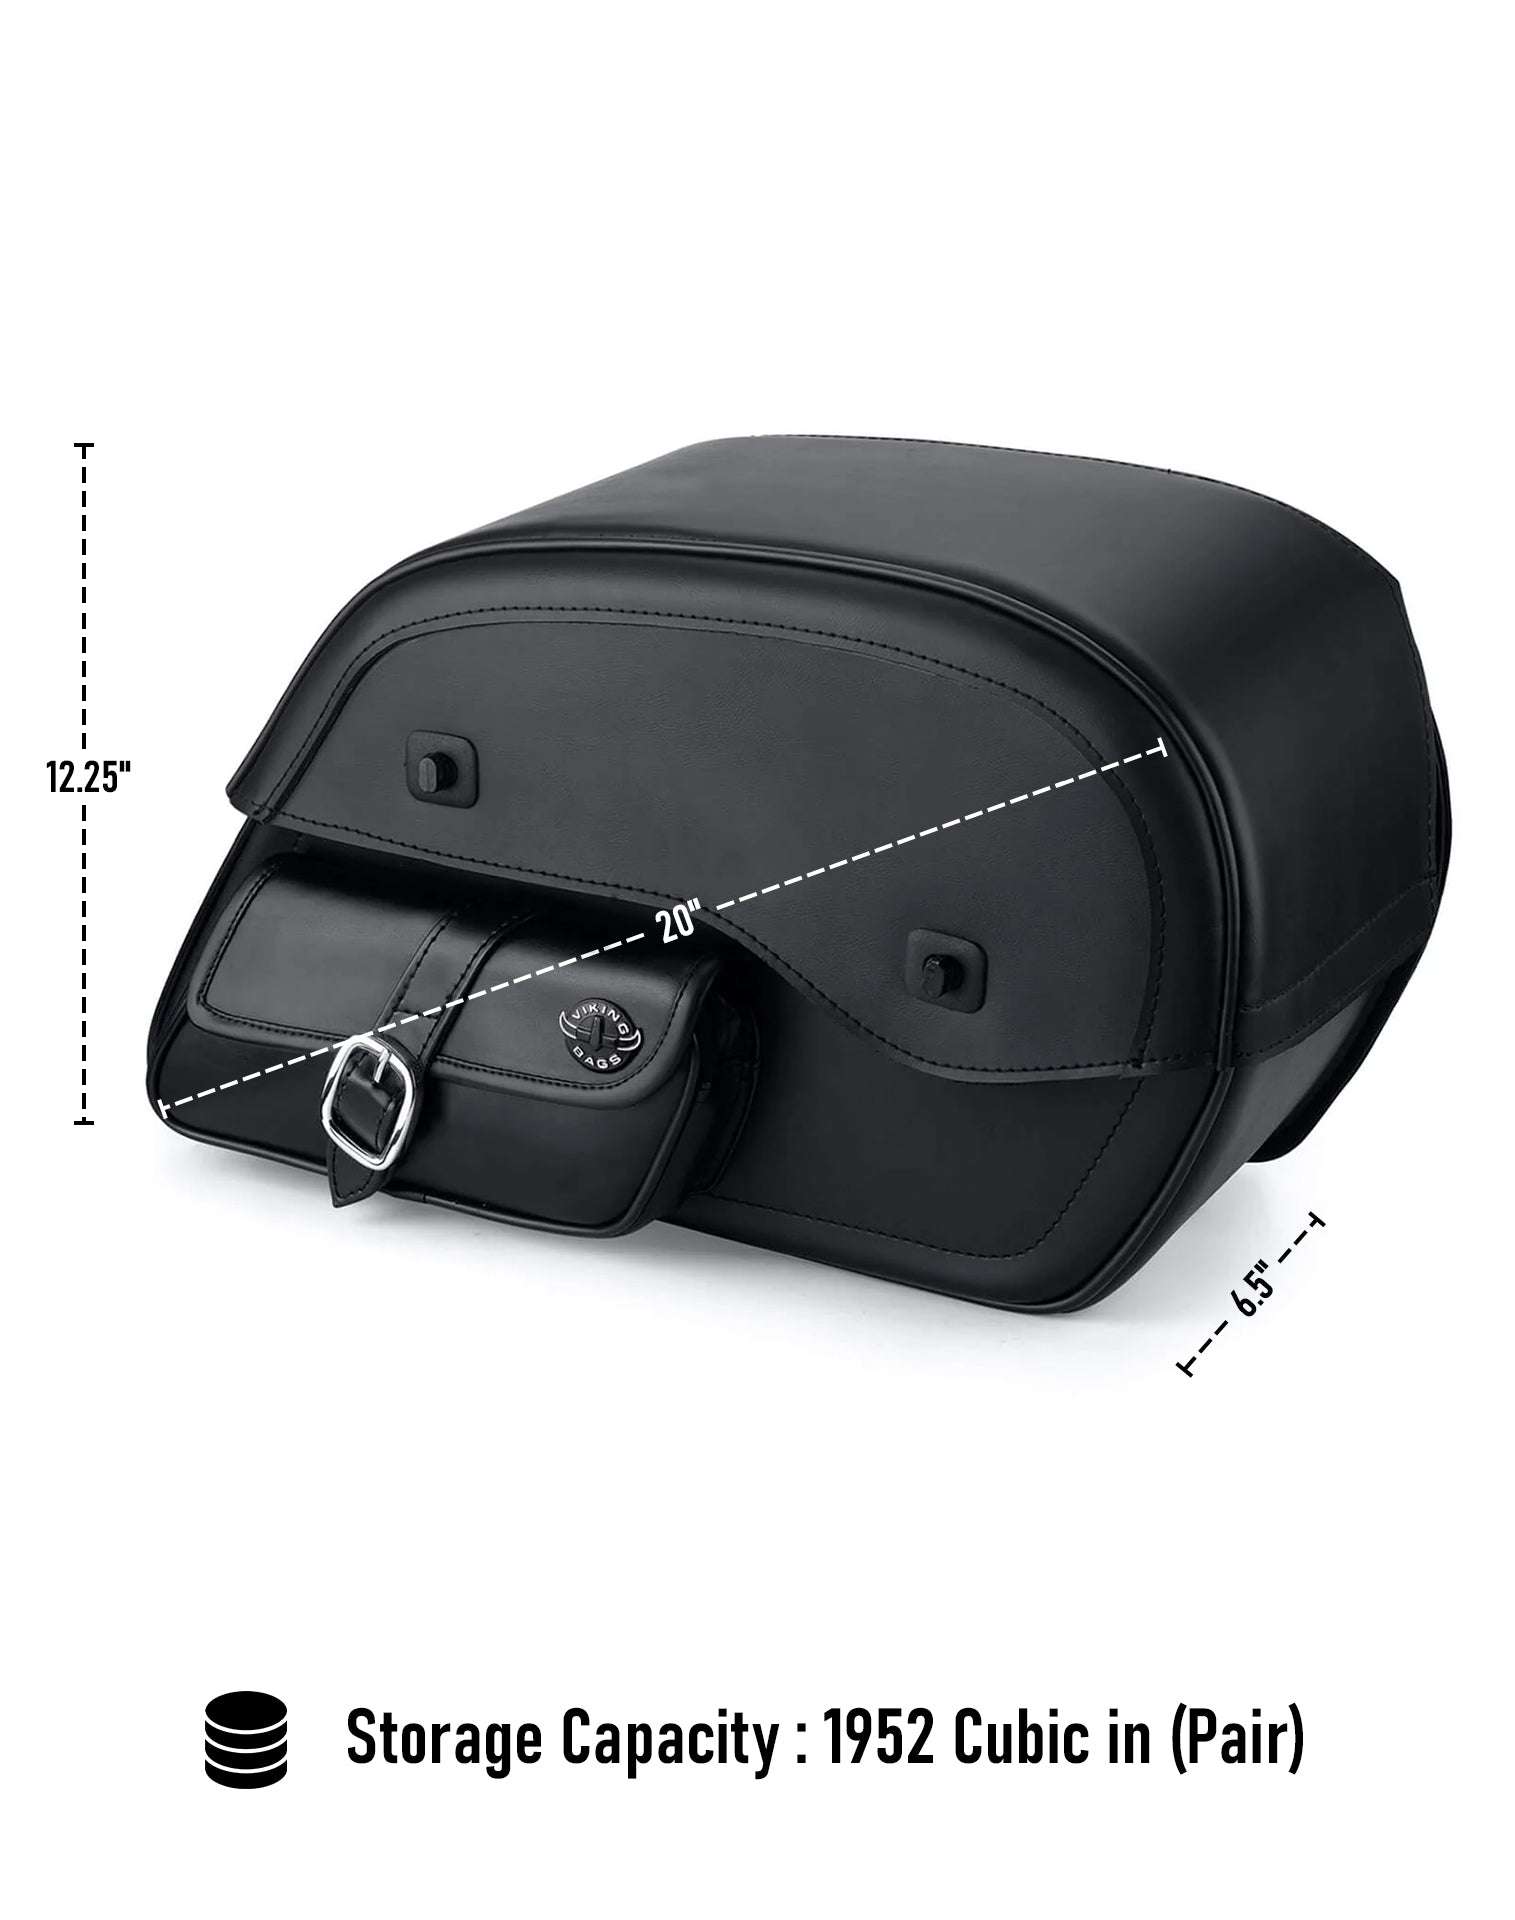 Viking Dweller Side Pocket Large Honda Valkyrie 1500 Tourer Leather Motorcycle Saddlebags Weather Resistant Bags Comes in Pair